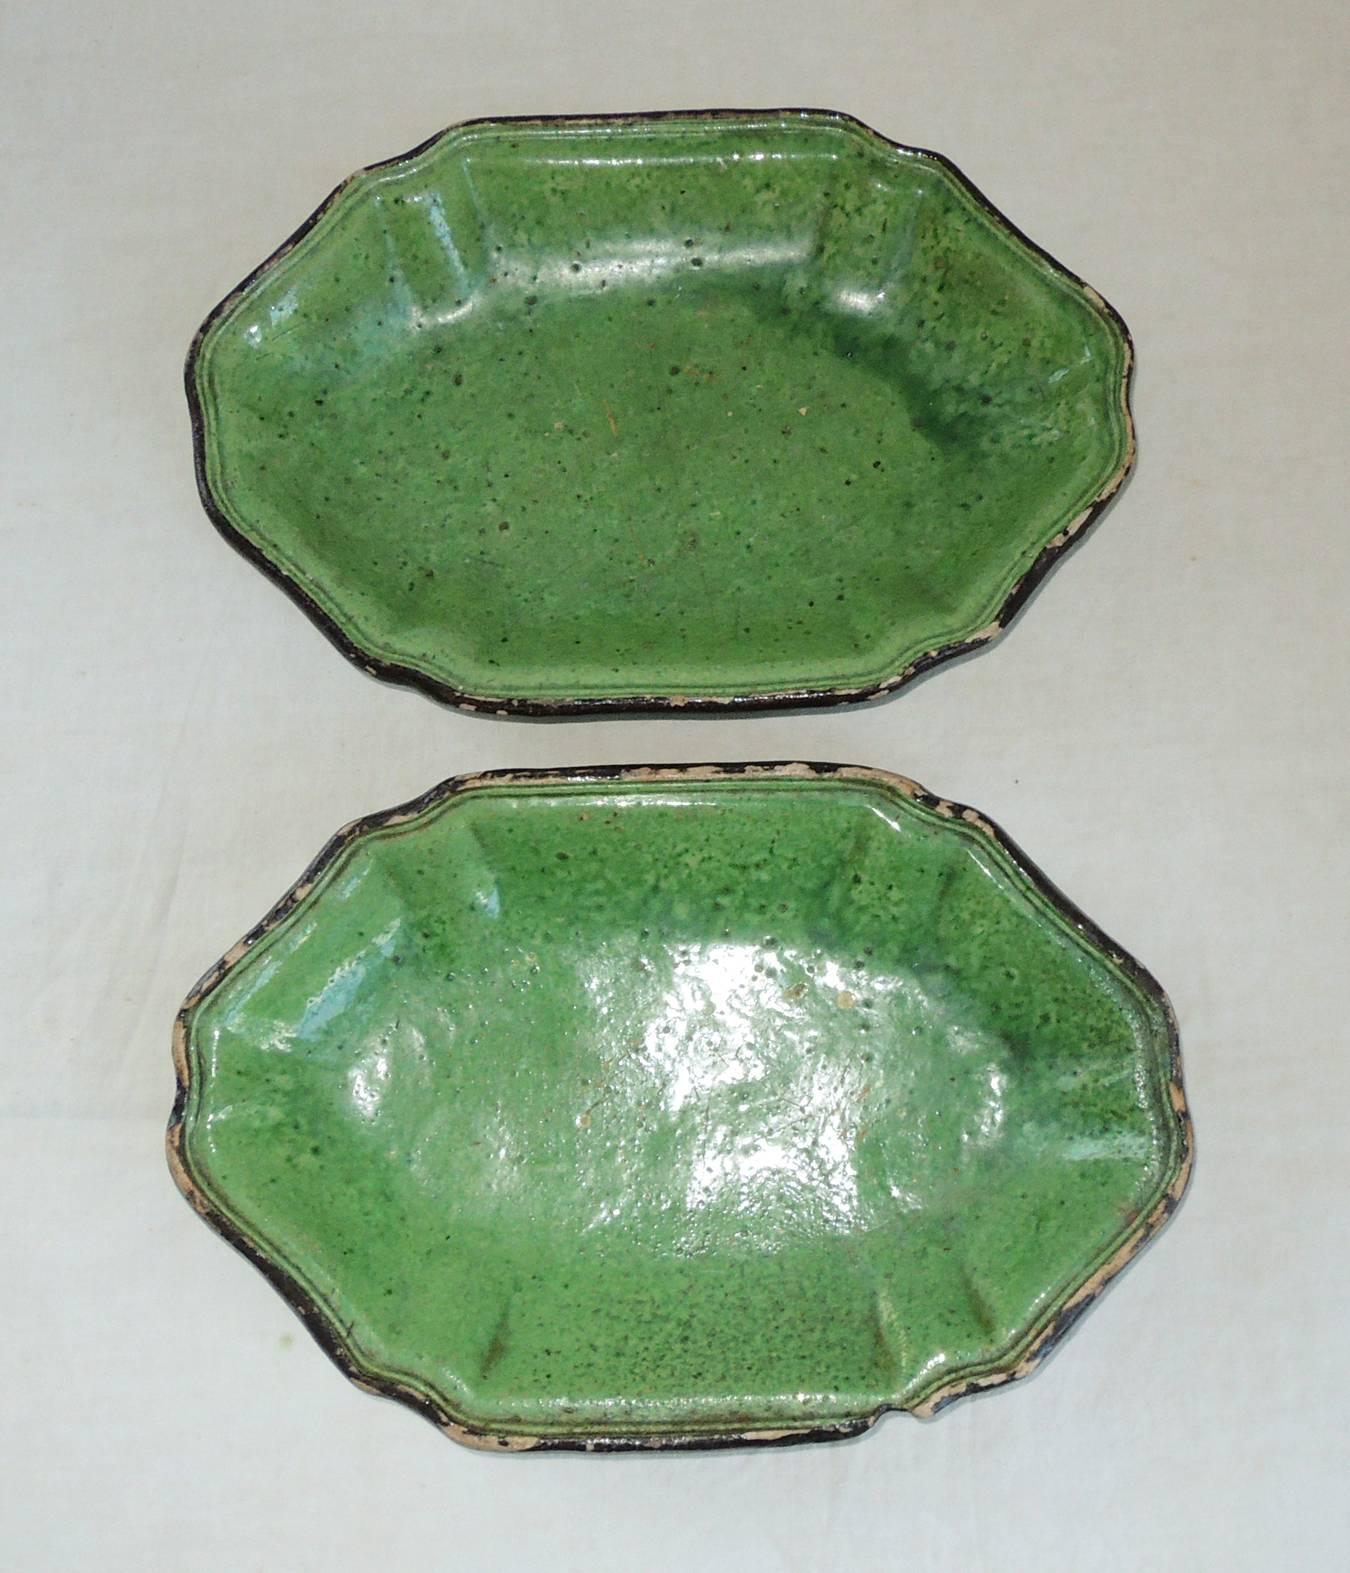 French Provincial Dieu-le-fit Serving Dishes